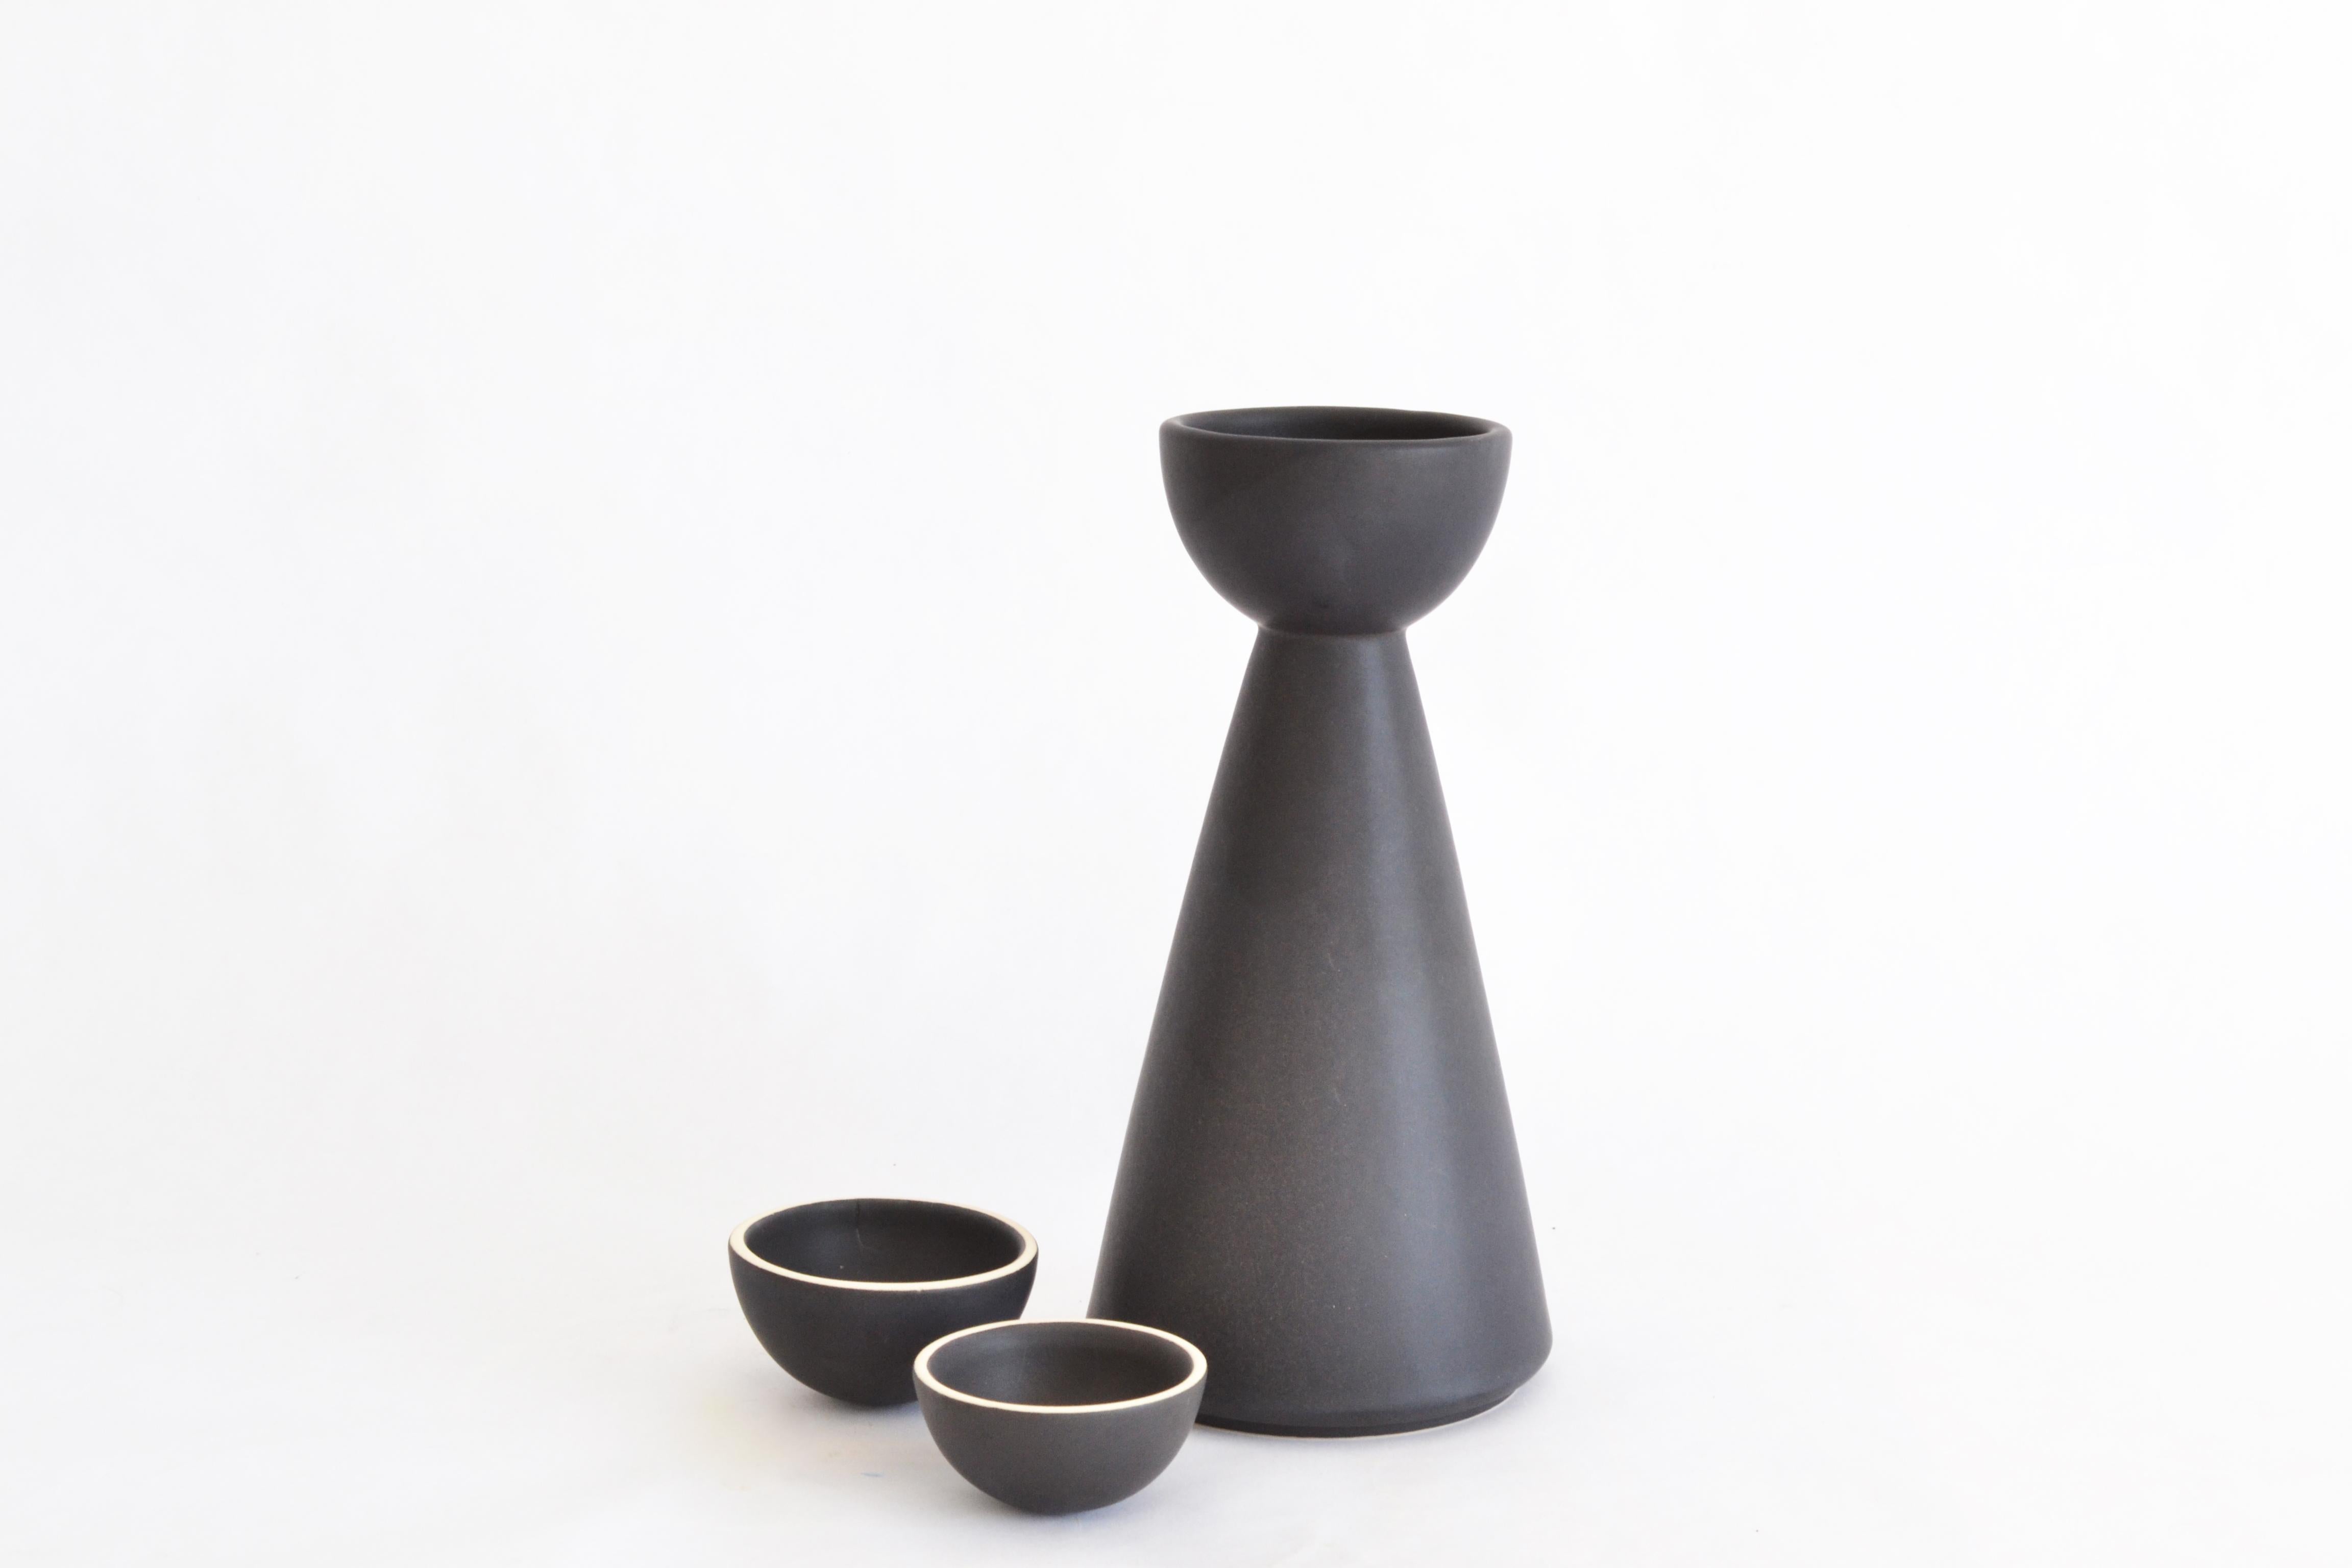 BLACK Carafe Contemporary Inspired by Traditional Jug Pitcher for Mezcal For Sale 2